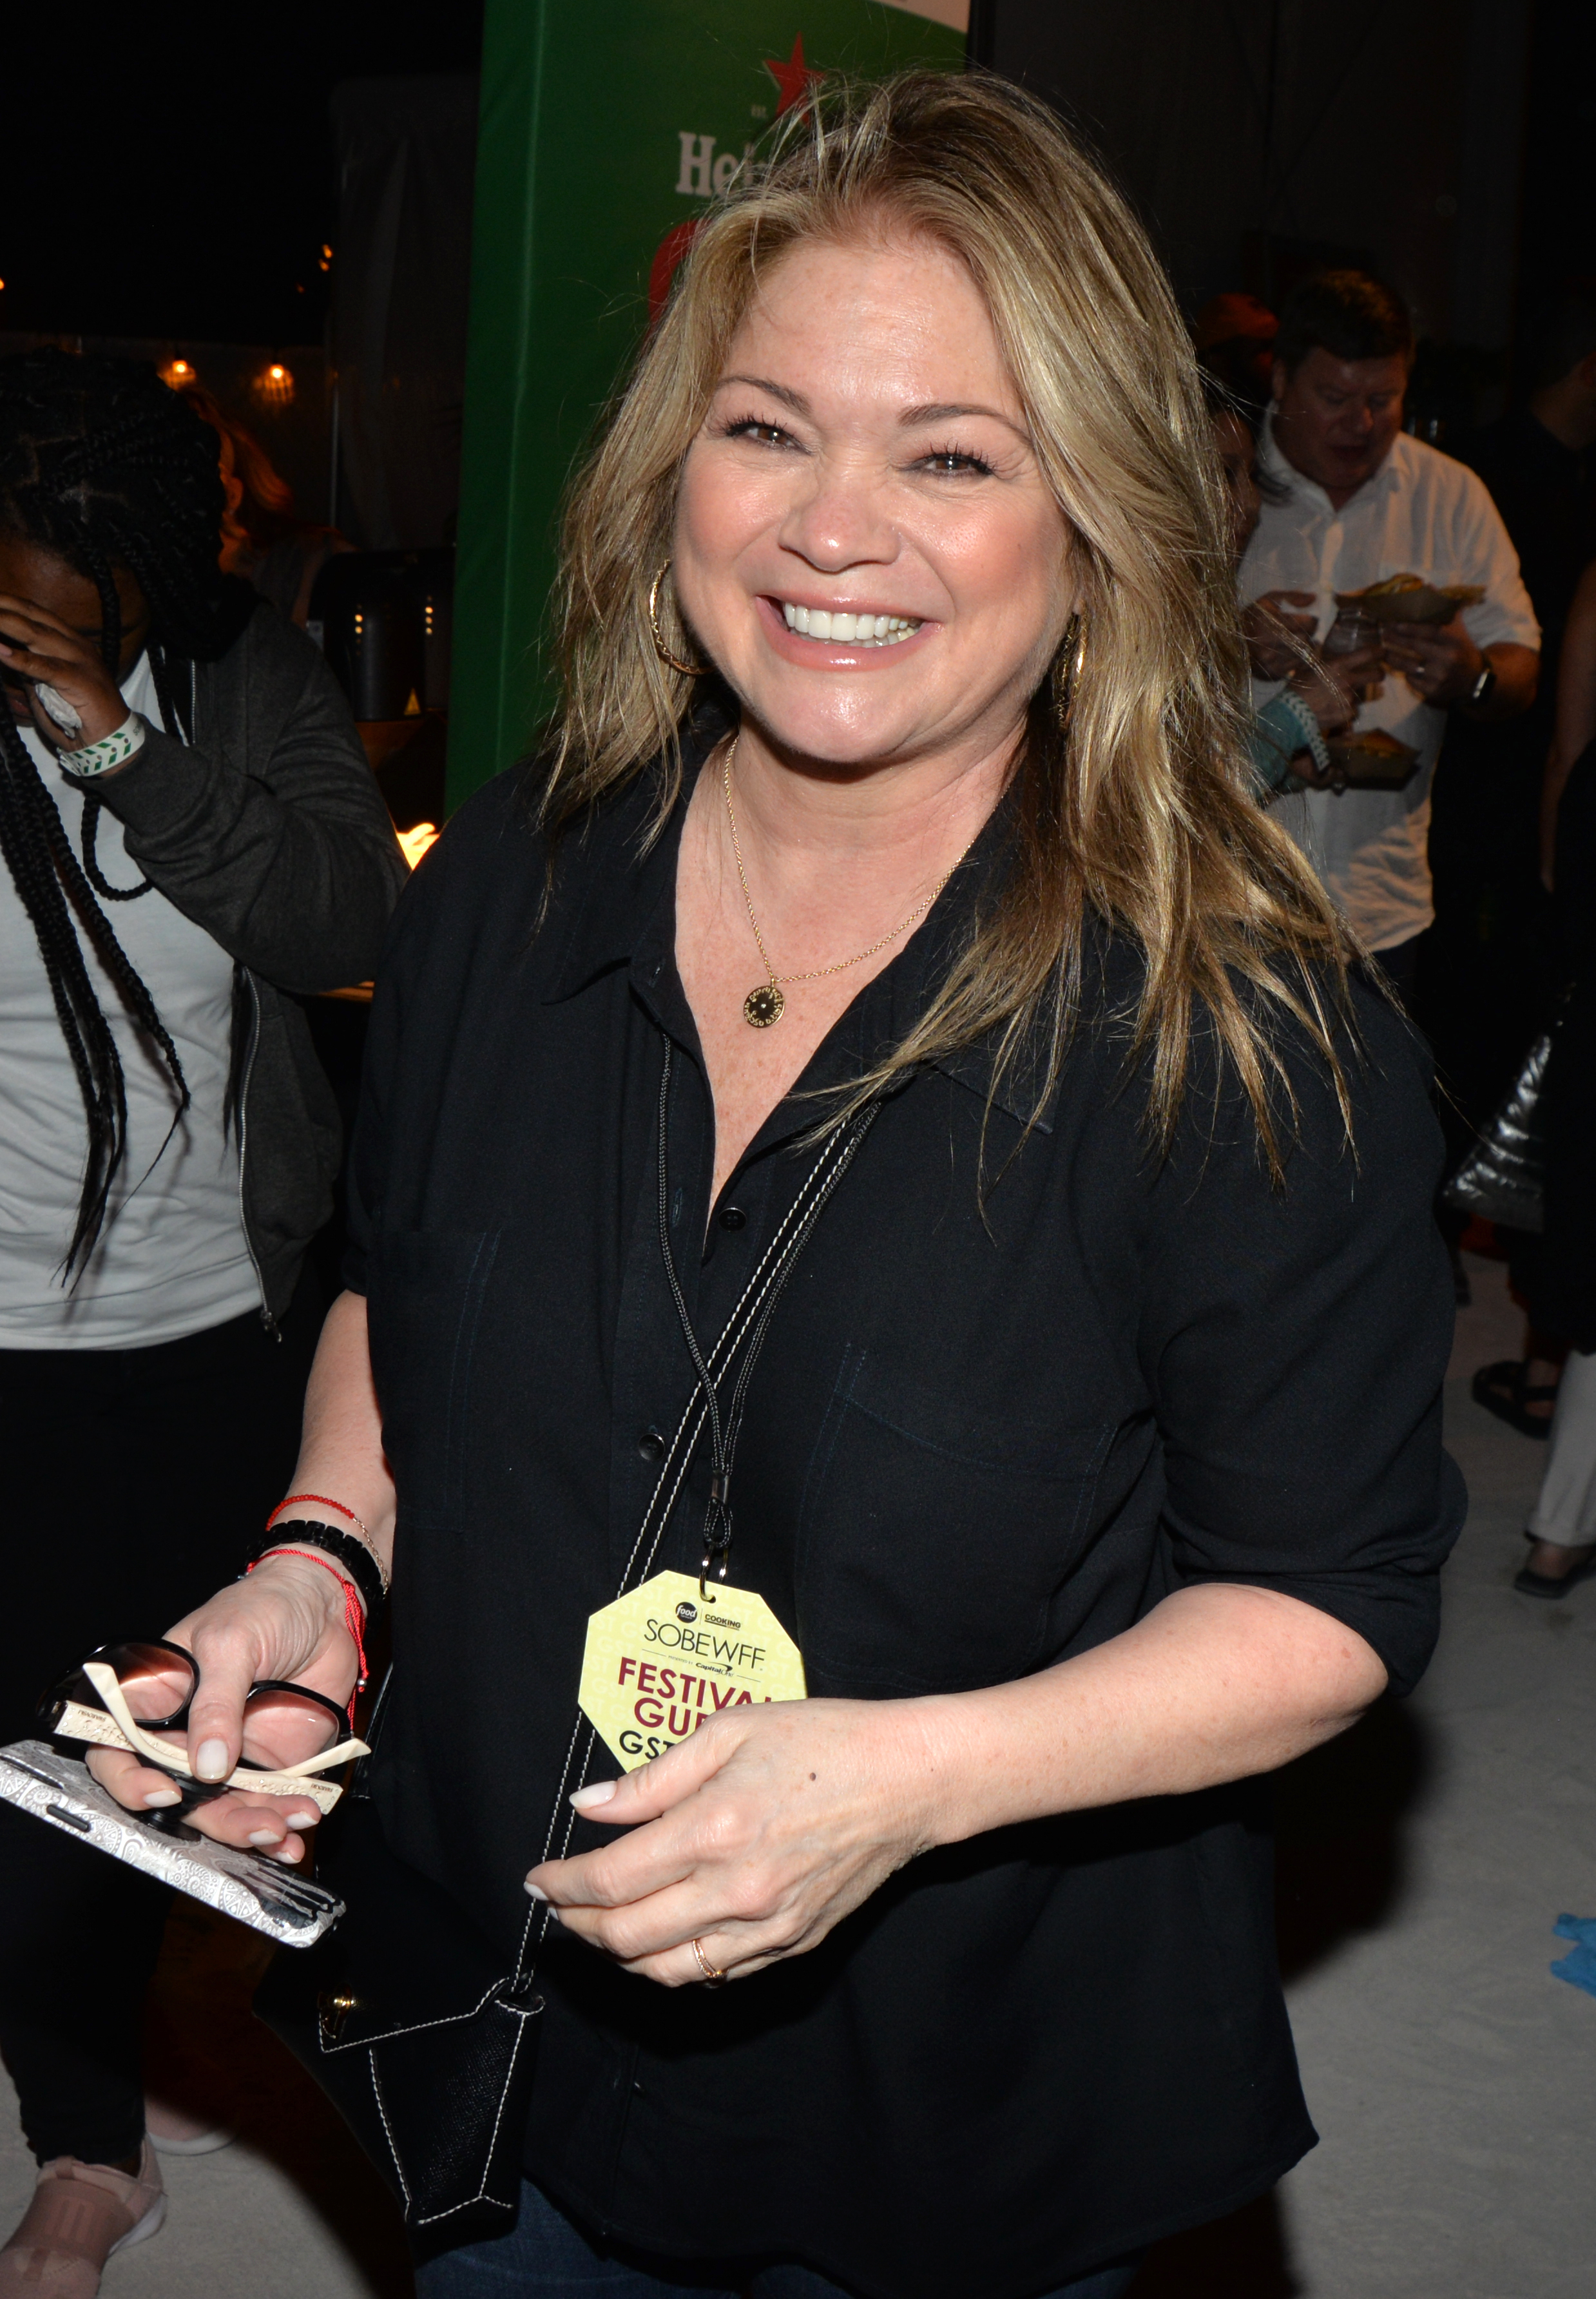 Valerie Bertinelli at the 19th Food Network South Beach Wine & Food Festival in Miami Beach, Florida on February 21, 2020 | Source: Getty Images